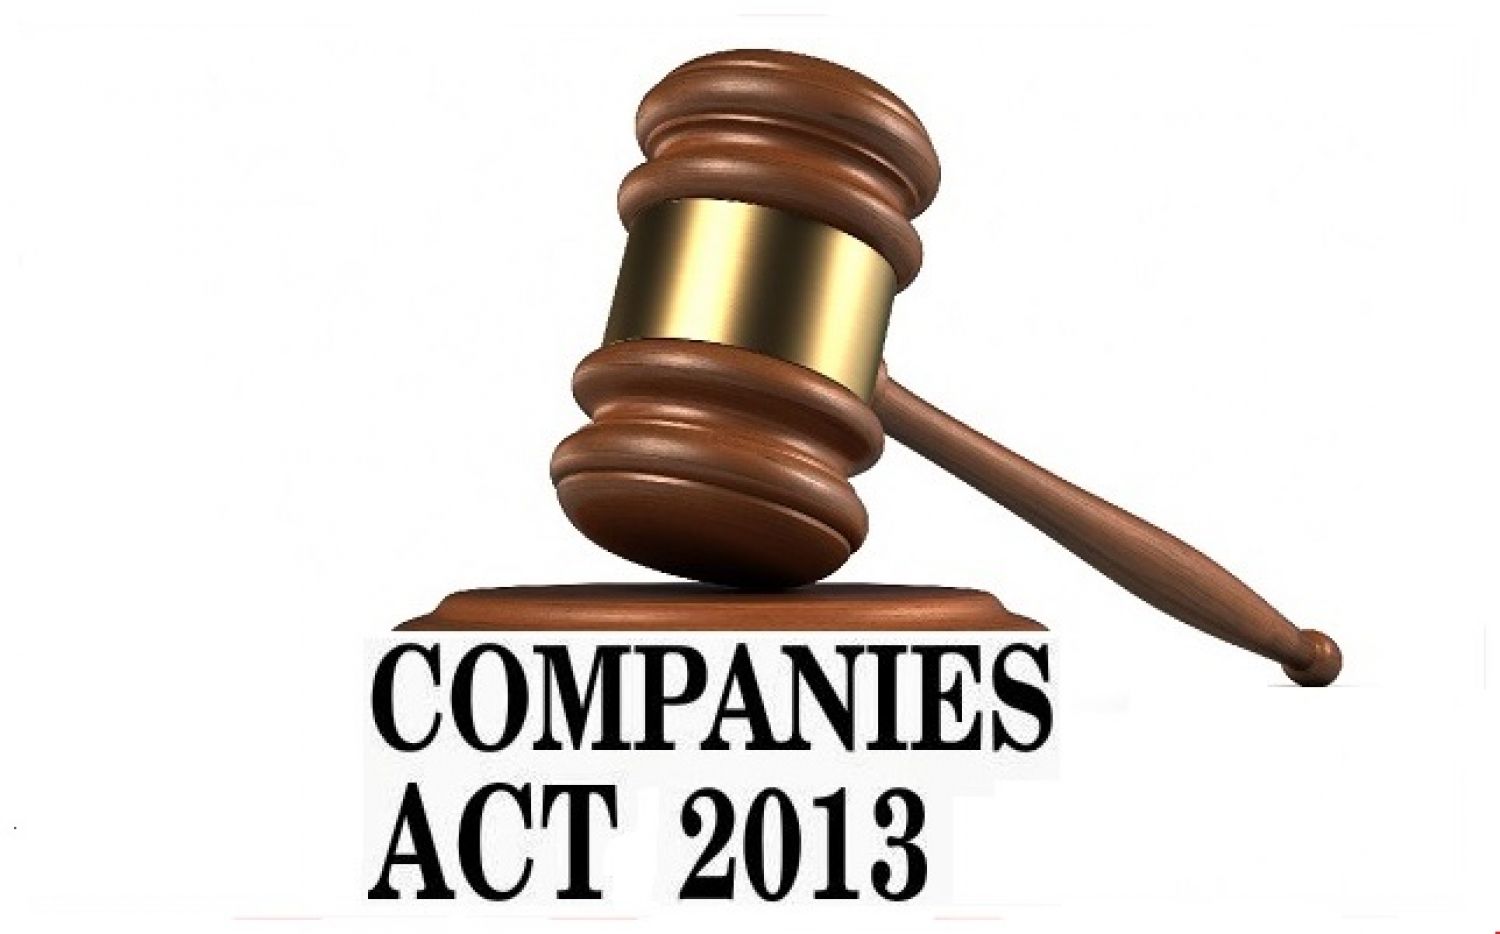 Compliance needs  for the month of aug 2021 under Co Act 2013 